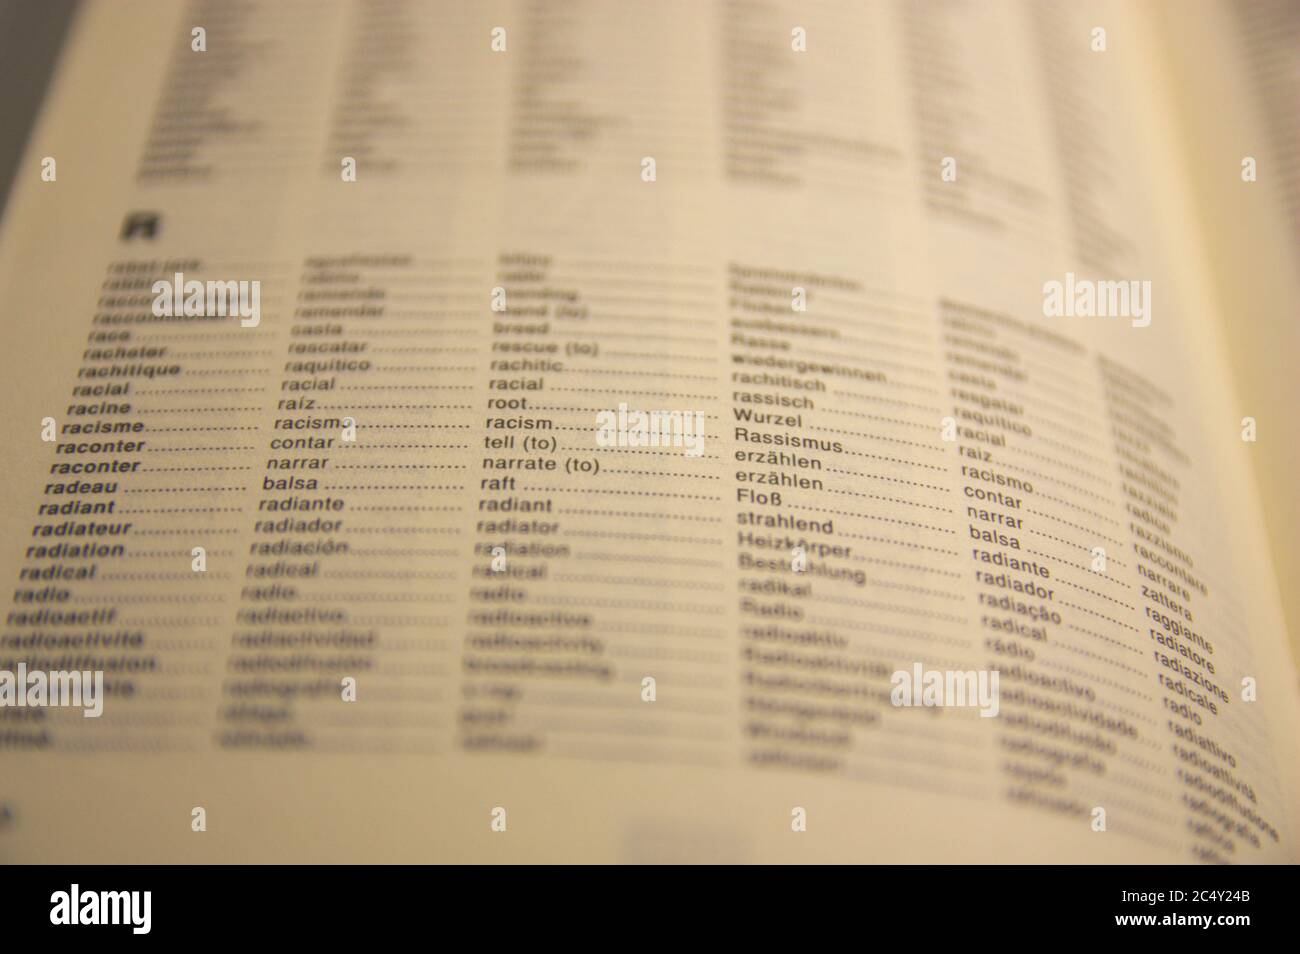 Closeup of a vocabulary sheet highlighting the word racism in different languages Stock Photo